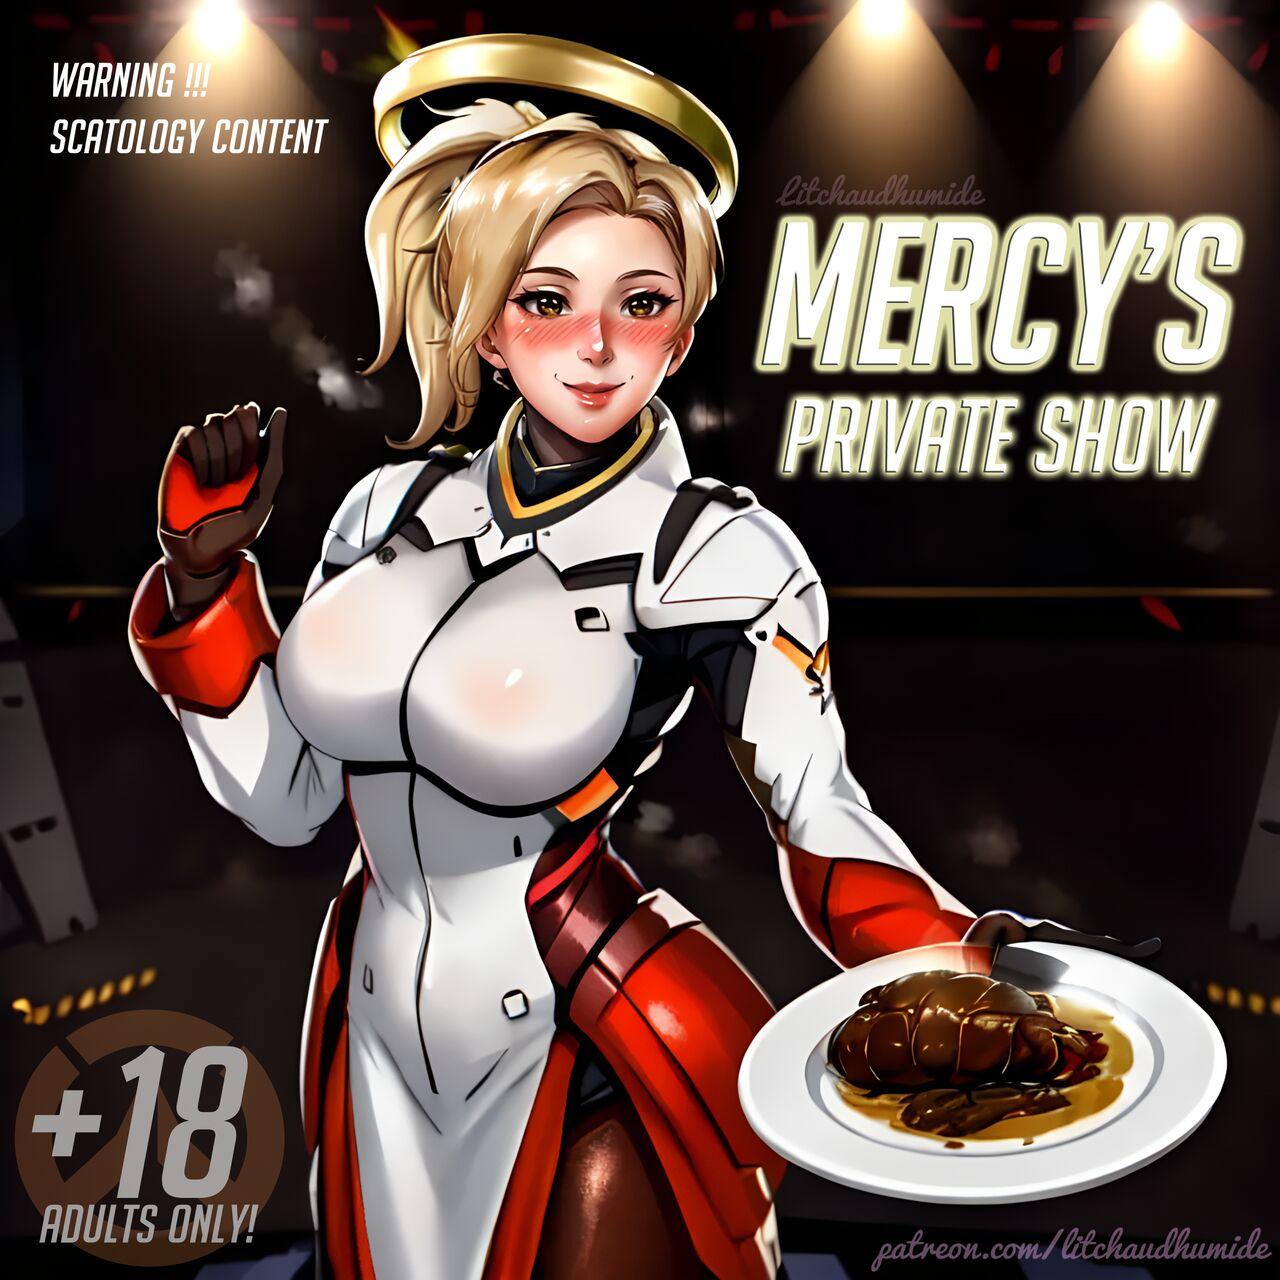 Litchaudhumide: Mercy's Private show ! 0